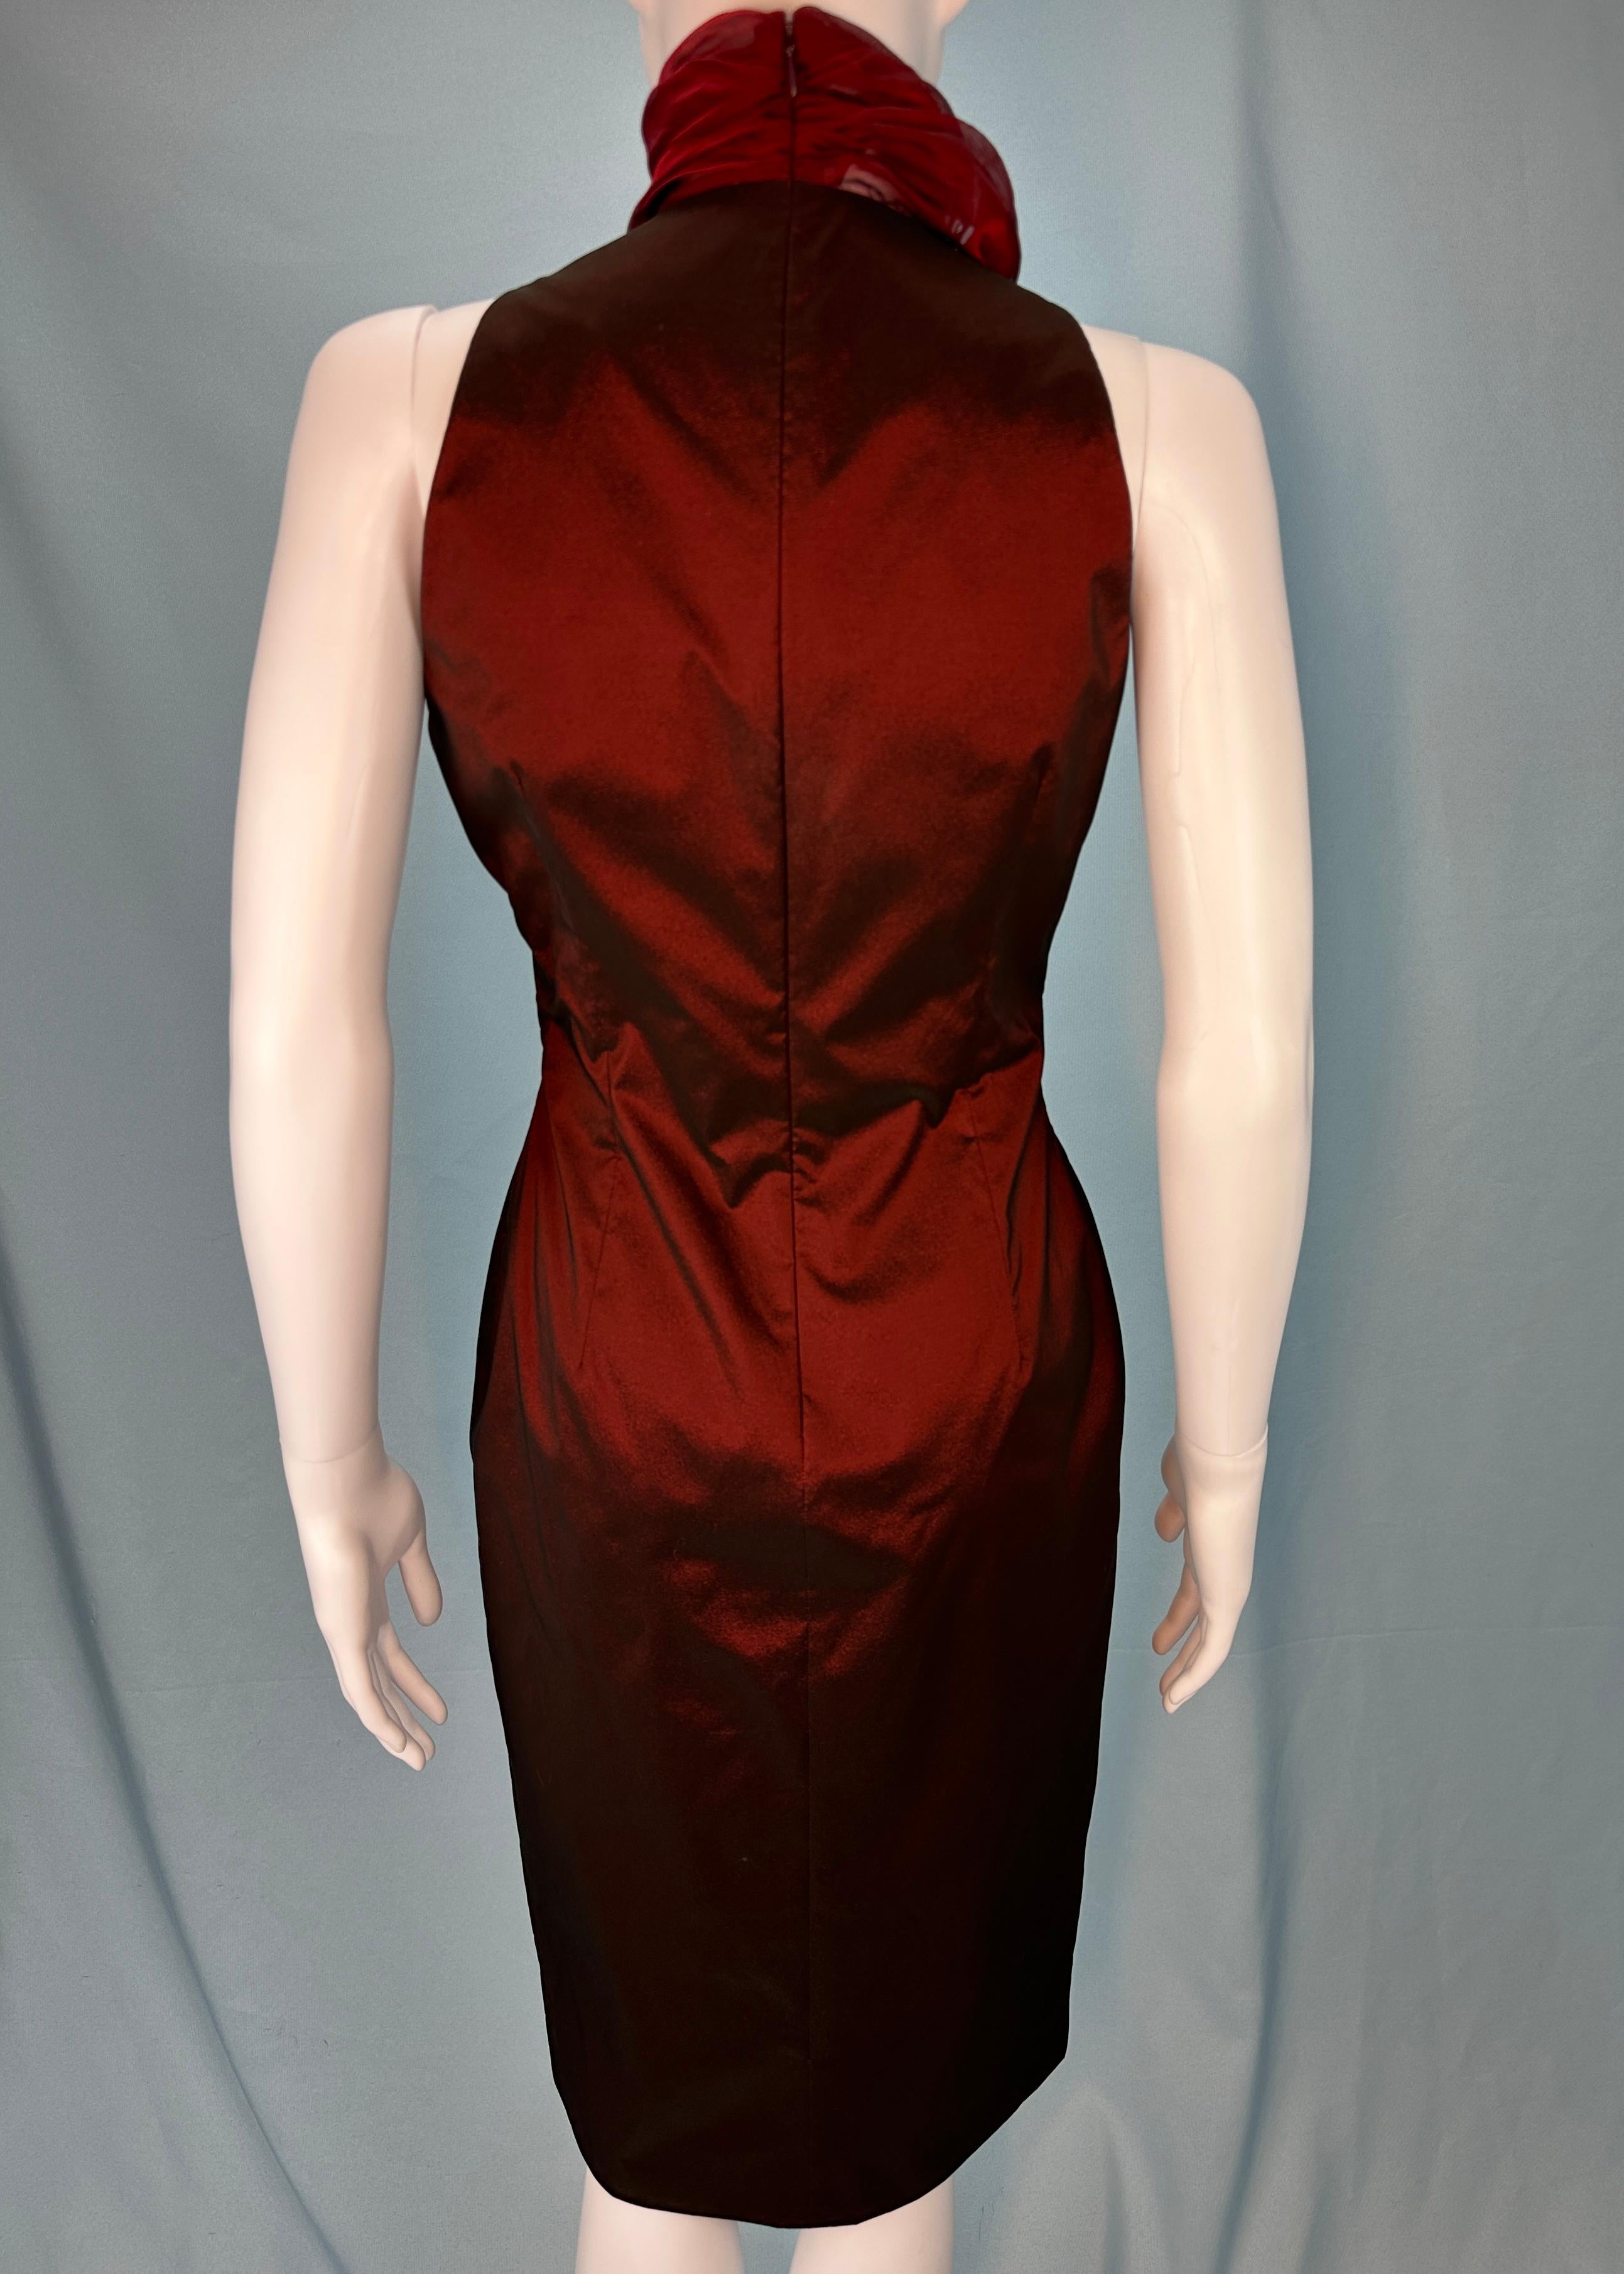 Givenchy Couture by Alexander McQueen Fall 1998 Red Chiffon Mock Neck Dress In Excellent Condition For Sale In Hertfordshire, GB